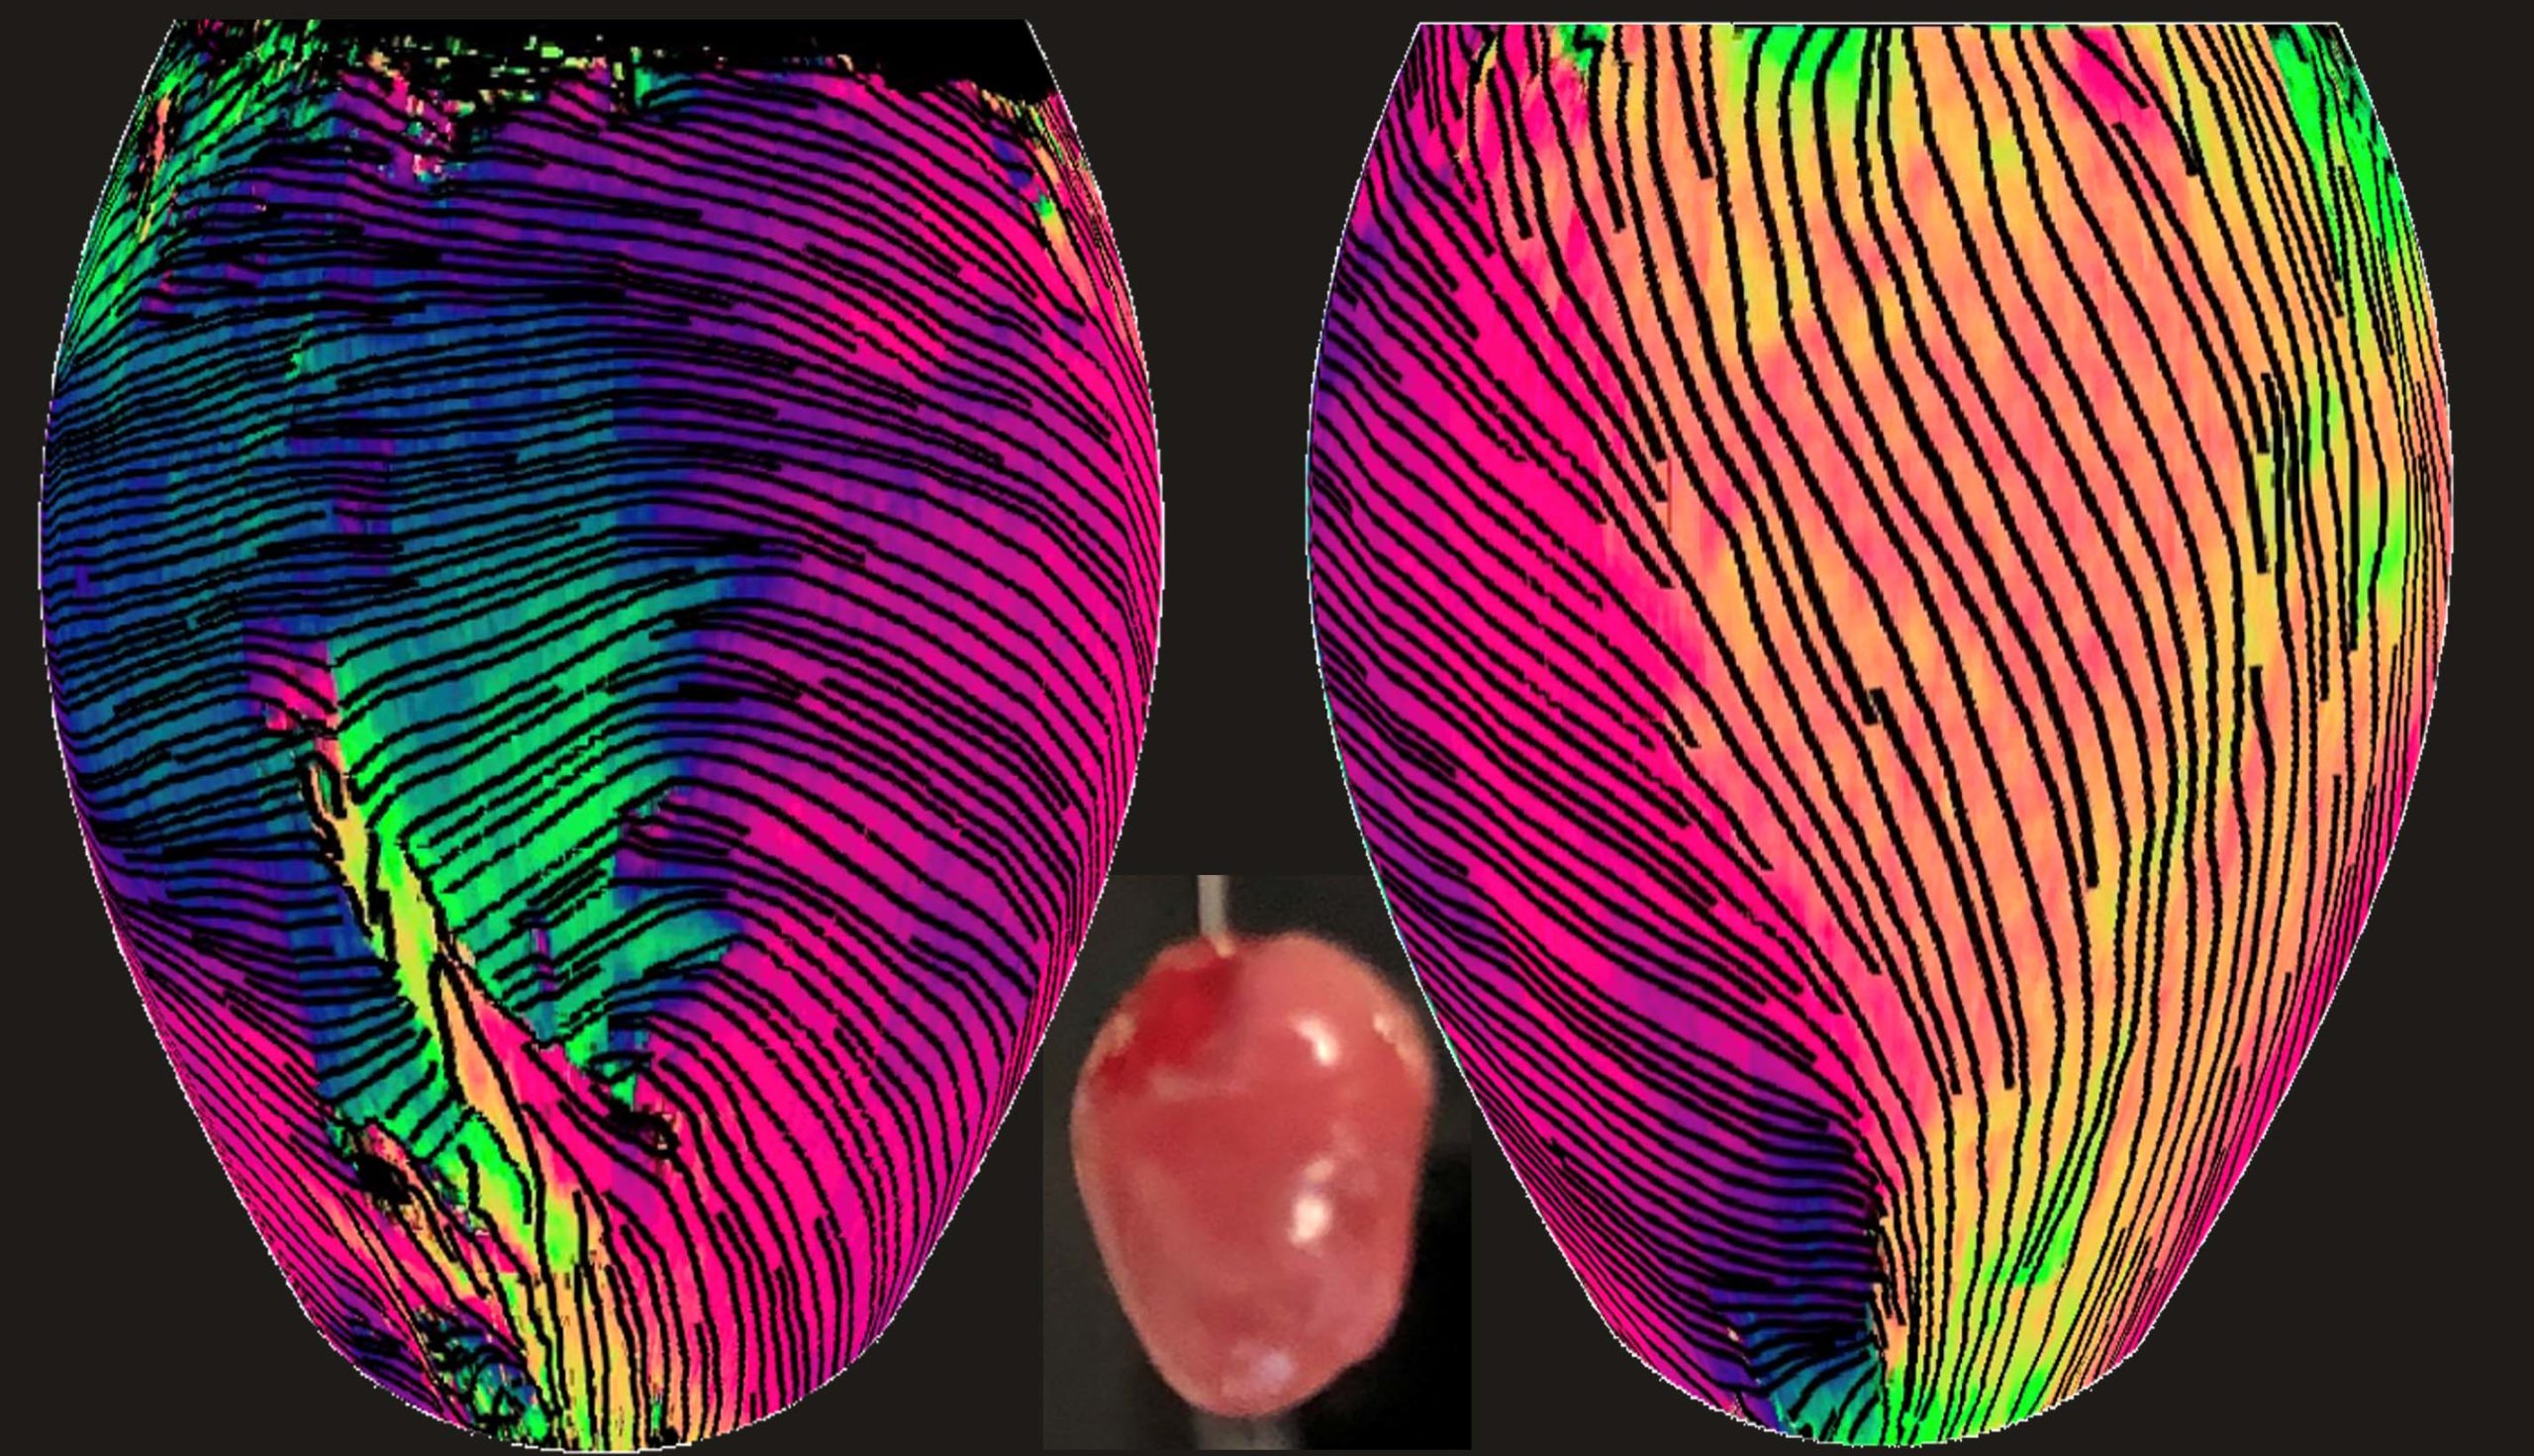 Two Colorful images showing collagen structure in rat hearts, and small photo of heart